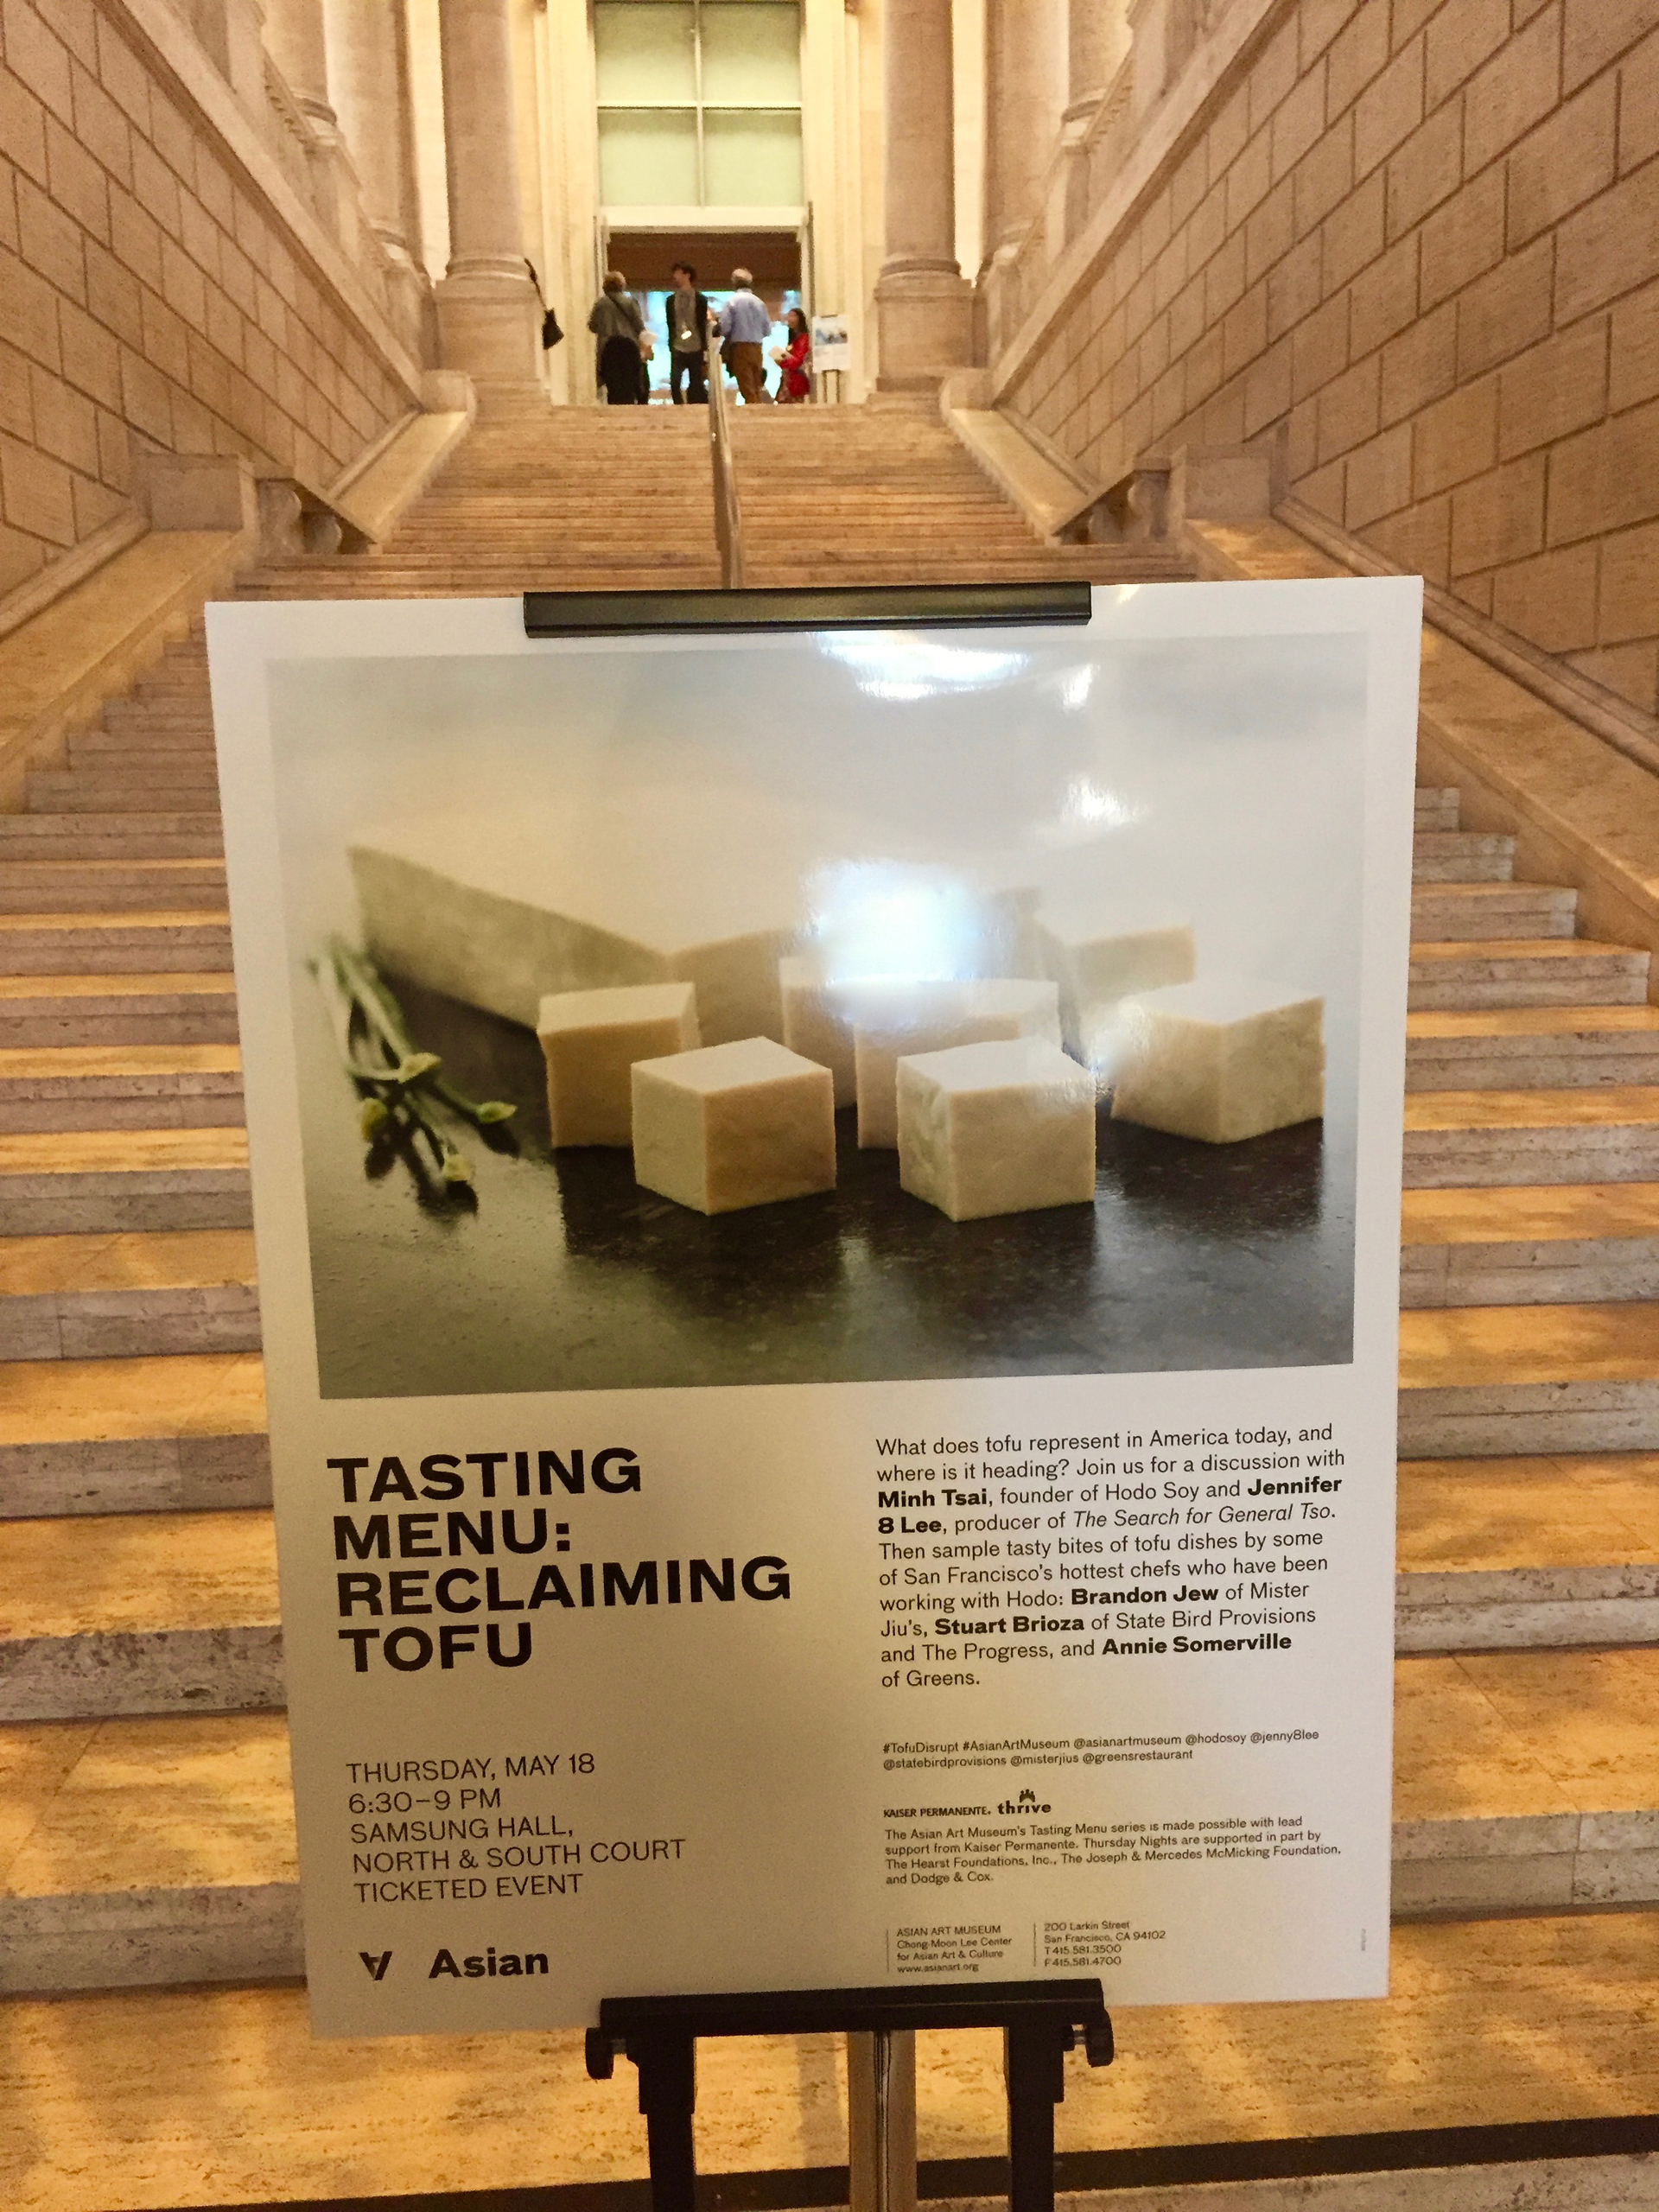 The San Francisco Asian Art Museum hosts periodic Tasting Menu programs, inviting patrons to make the connection between food and art.